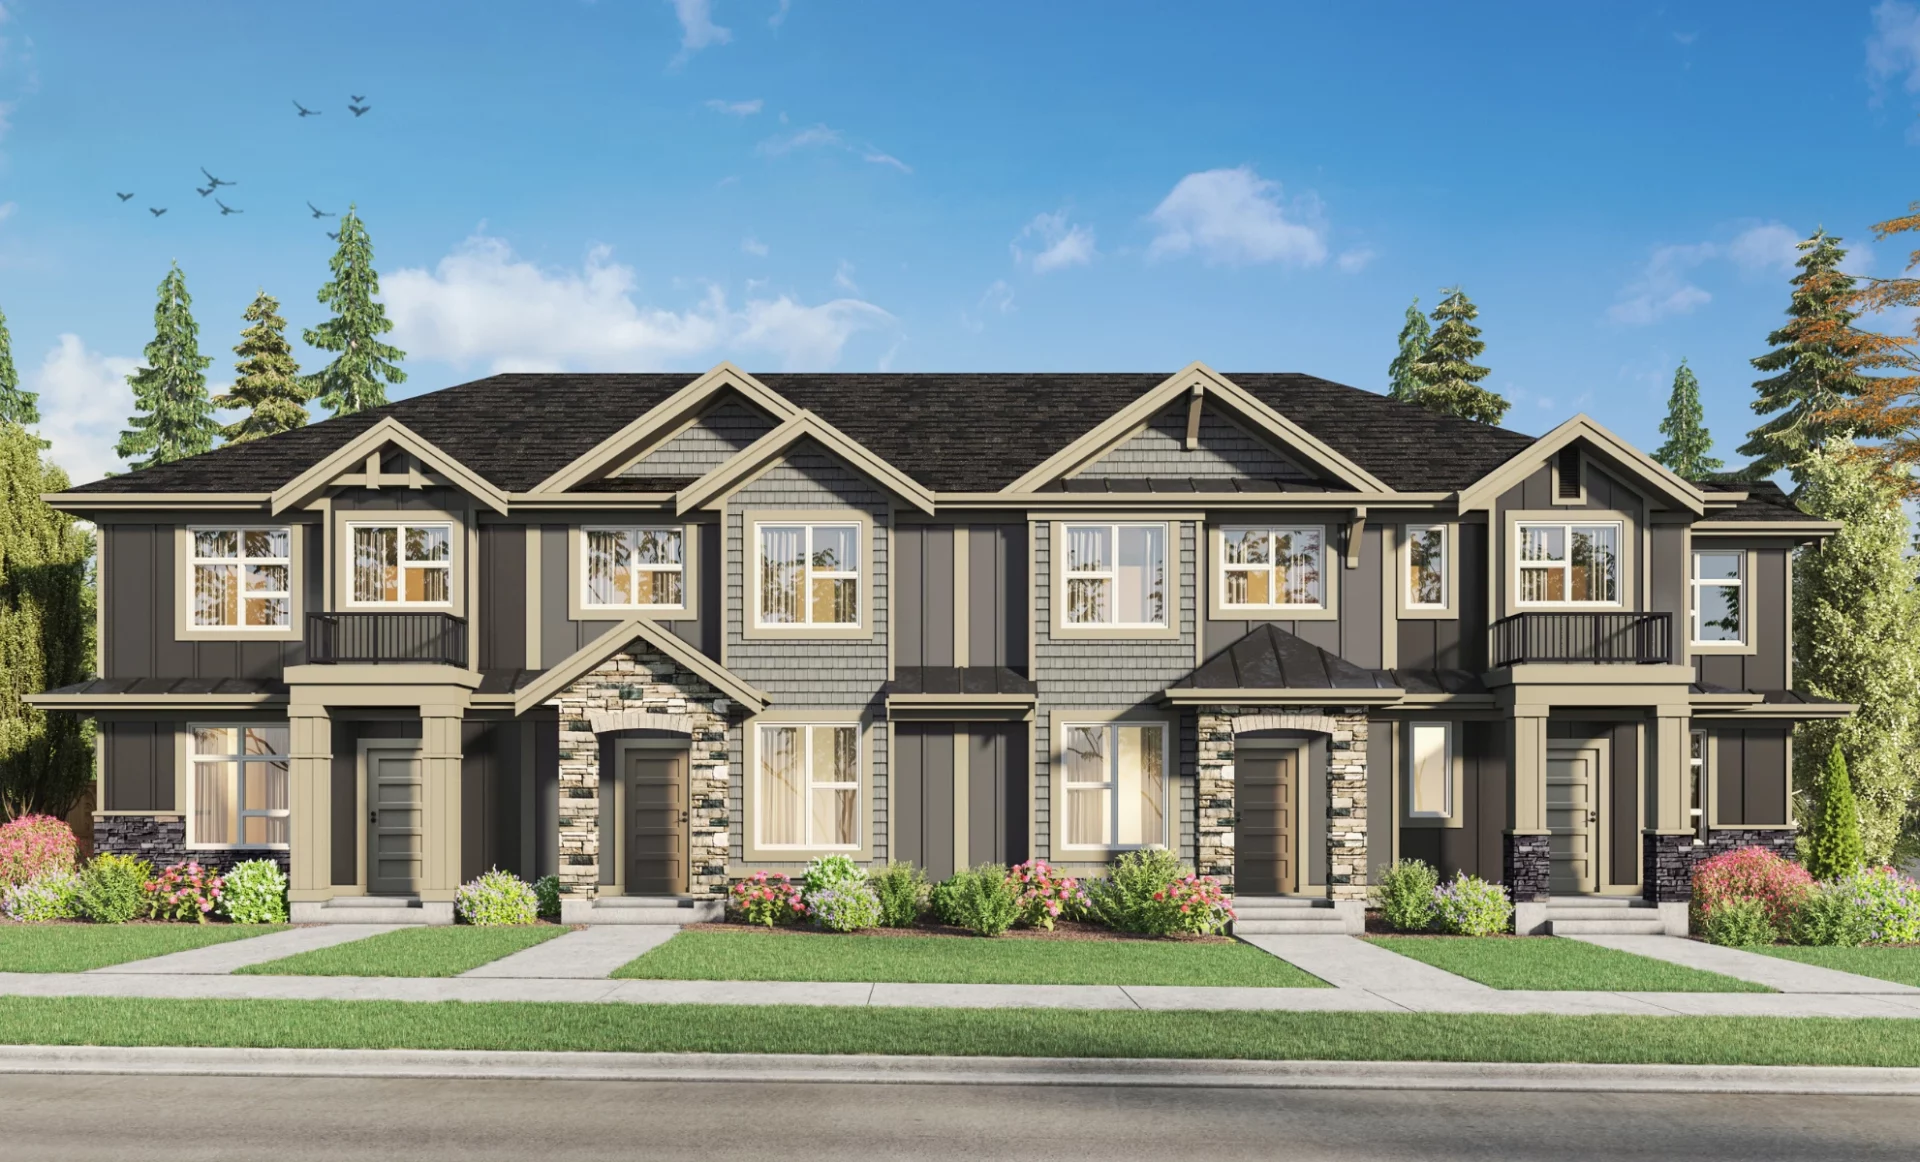 Brighton West rowhomes by Foxridge Homes is a collection of Langley non-strata homes.